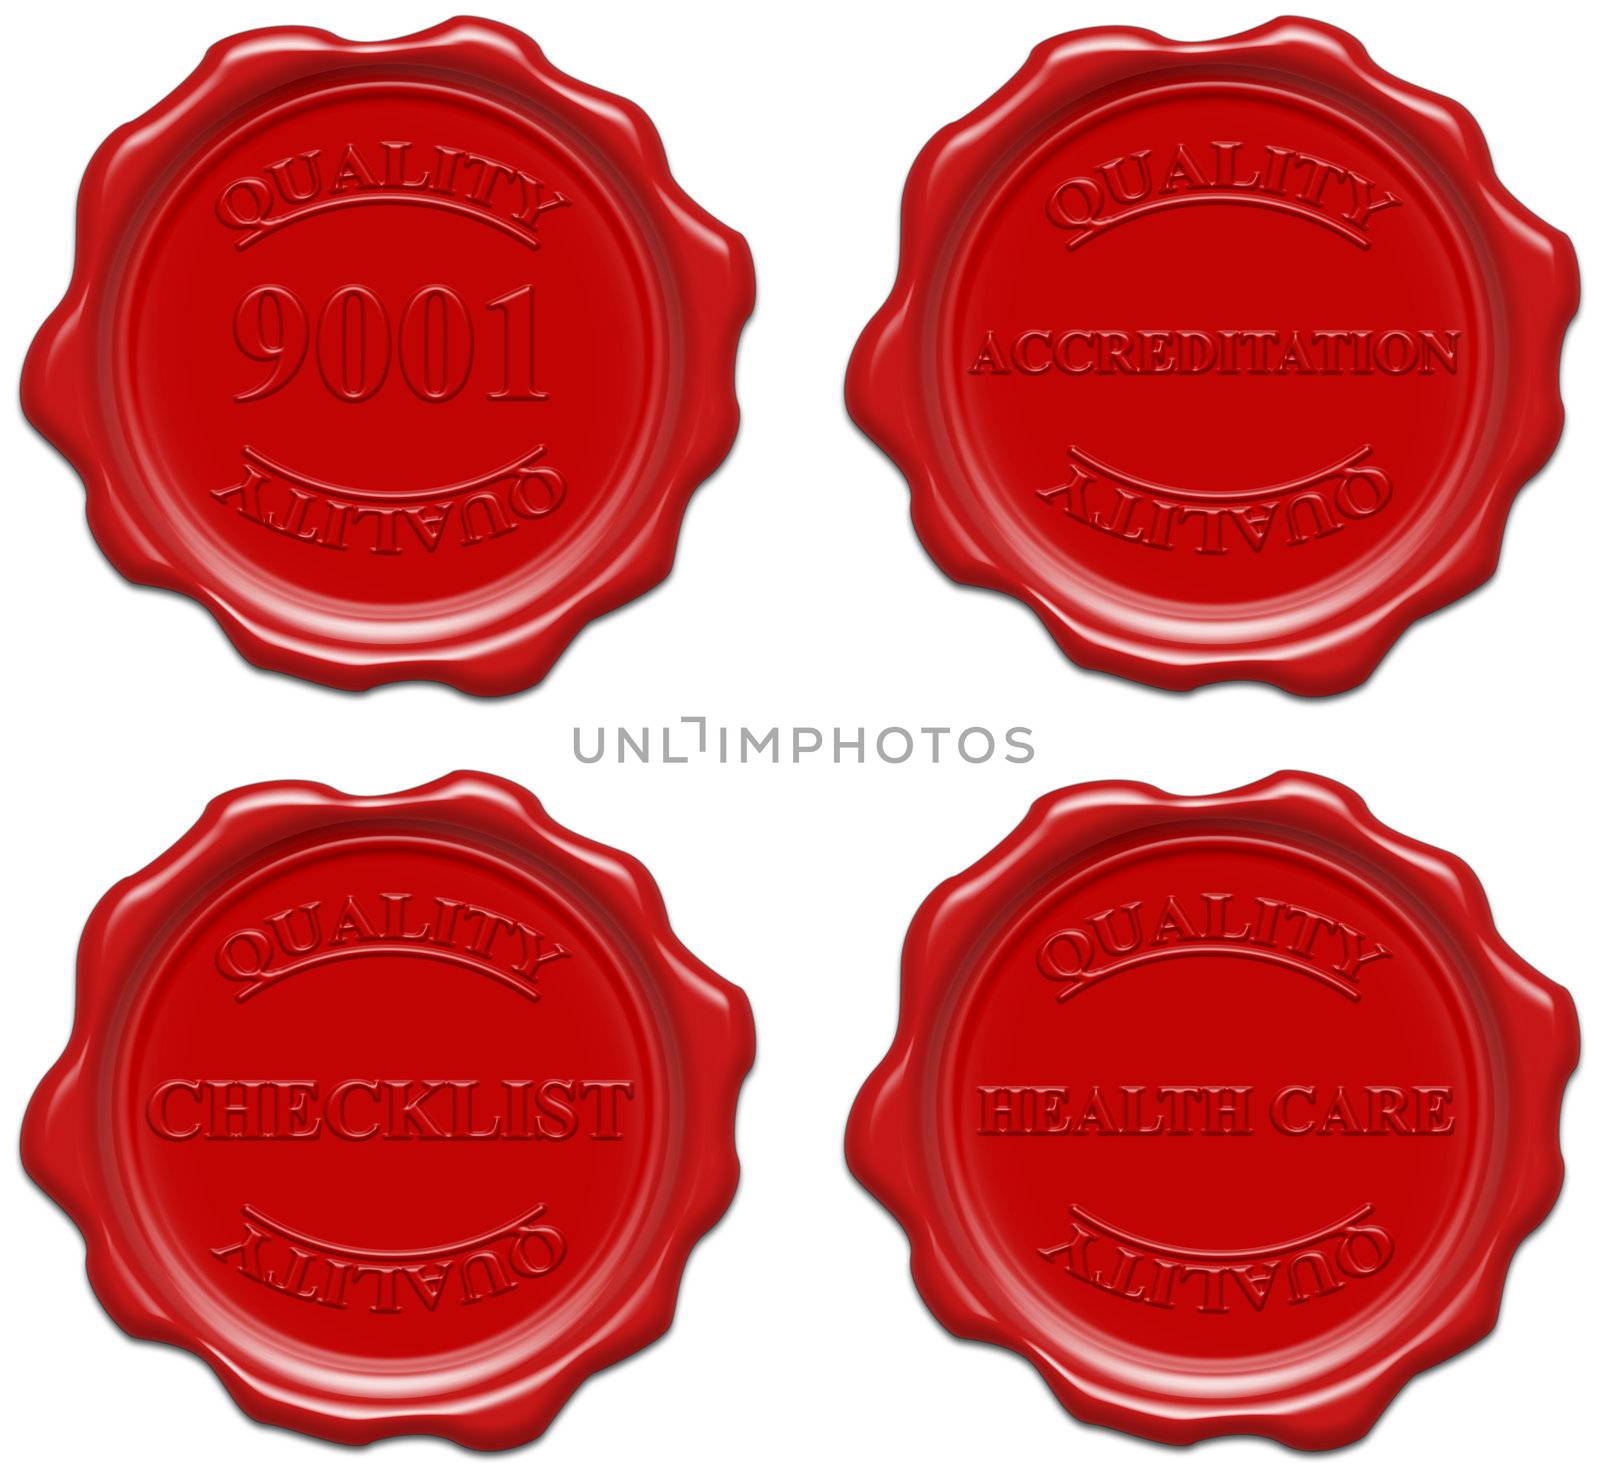 High resolution realistic red wax seal with text : 9001, accredi by mozzyb